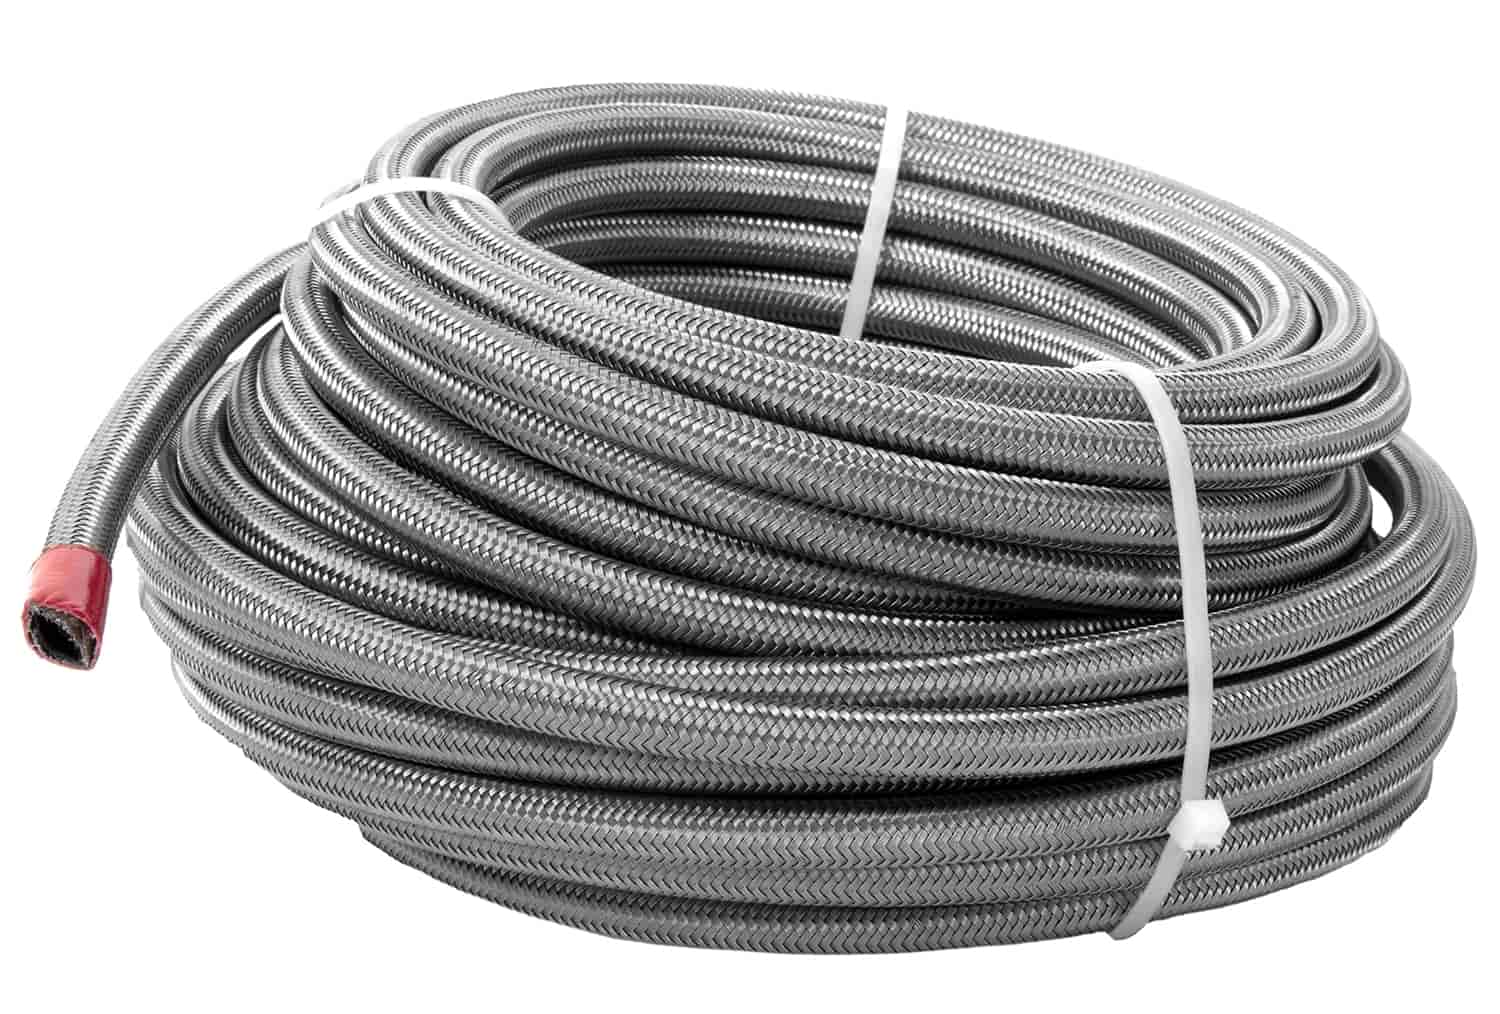 Braided Stainless Steel PTFE Fuel Hose -6 AN x 8 ft